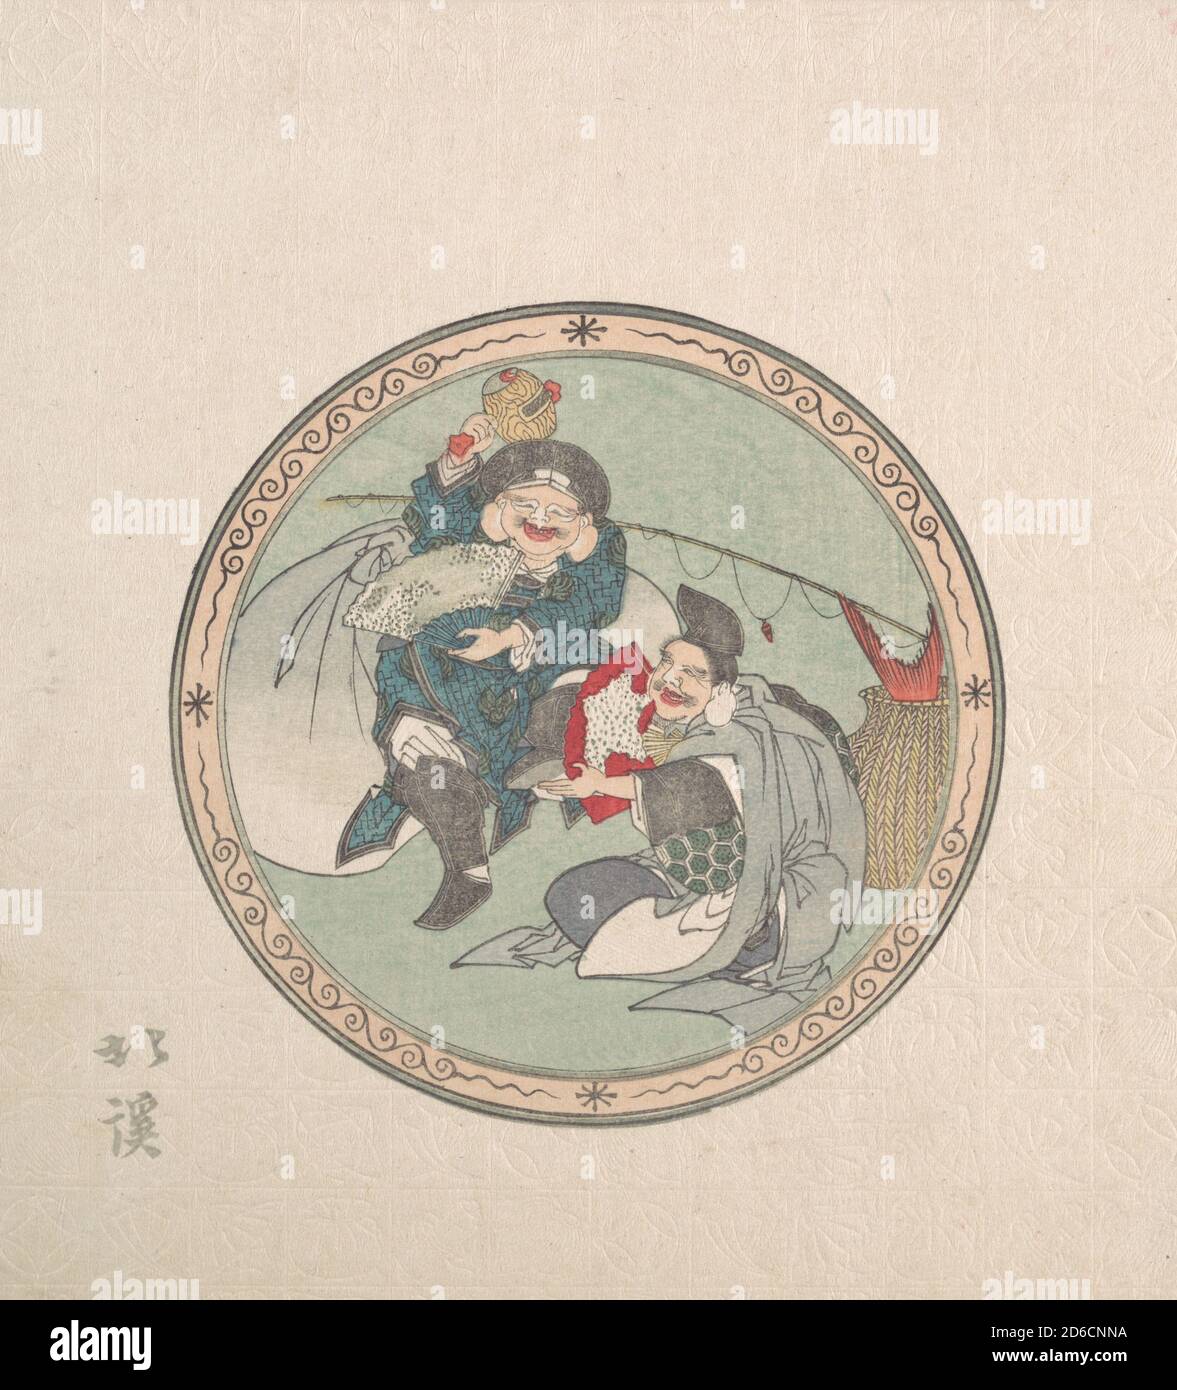 Ebisu and Daikoku; Two of the Seven Gods of Good Fortune, 19th century. Stock Photo